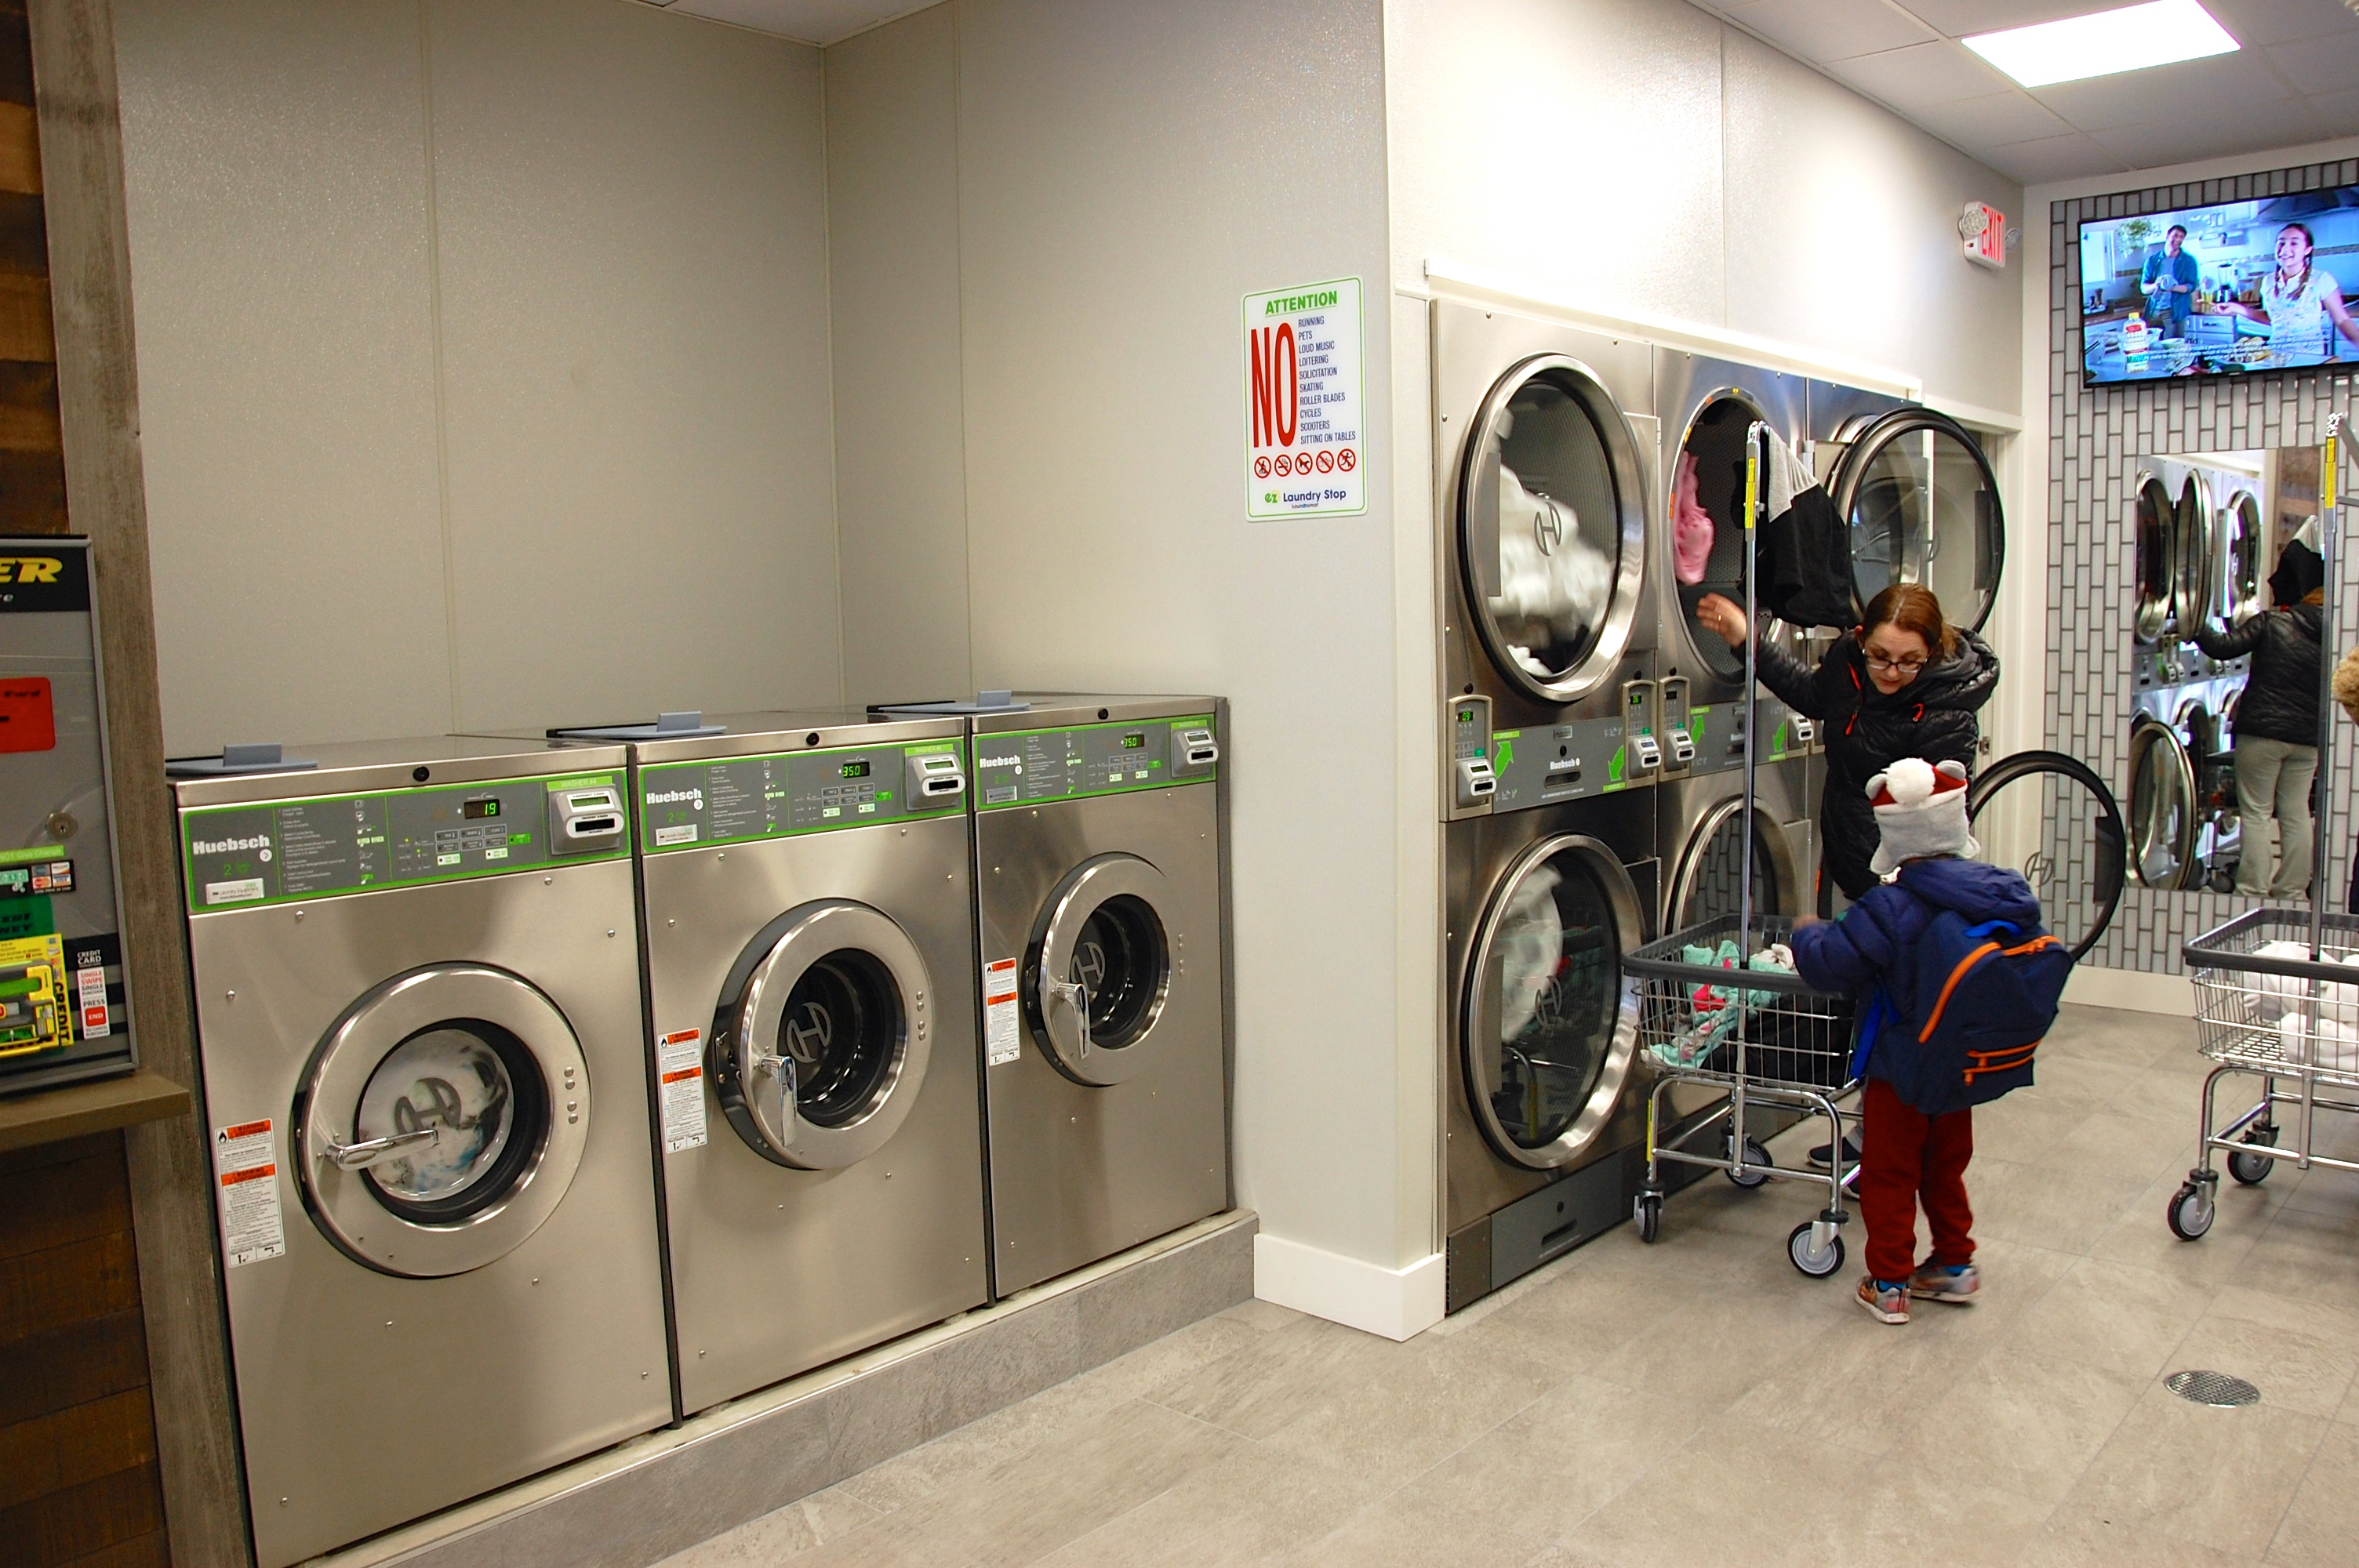 The professional designed Laundromat maximizes the number of machines & customer space. Thumbnail